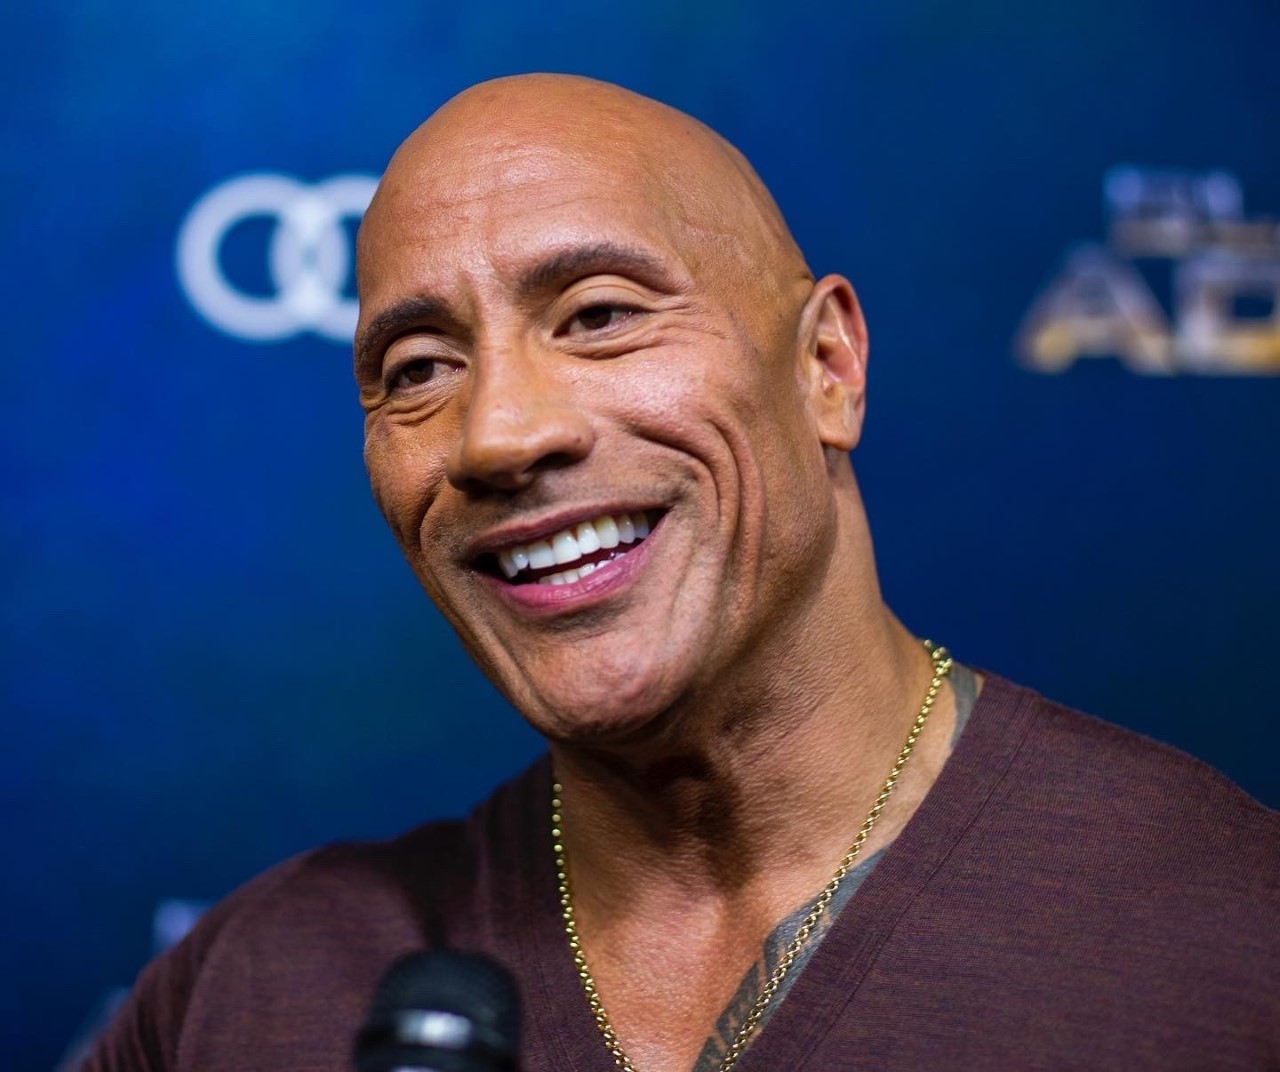 Dwayne 'The Rock' Johnson is 'aware' he might potentially become a